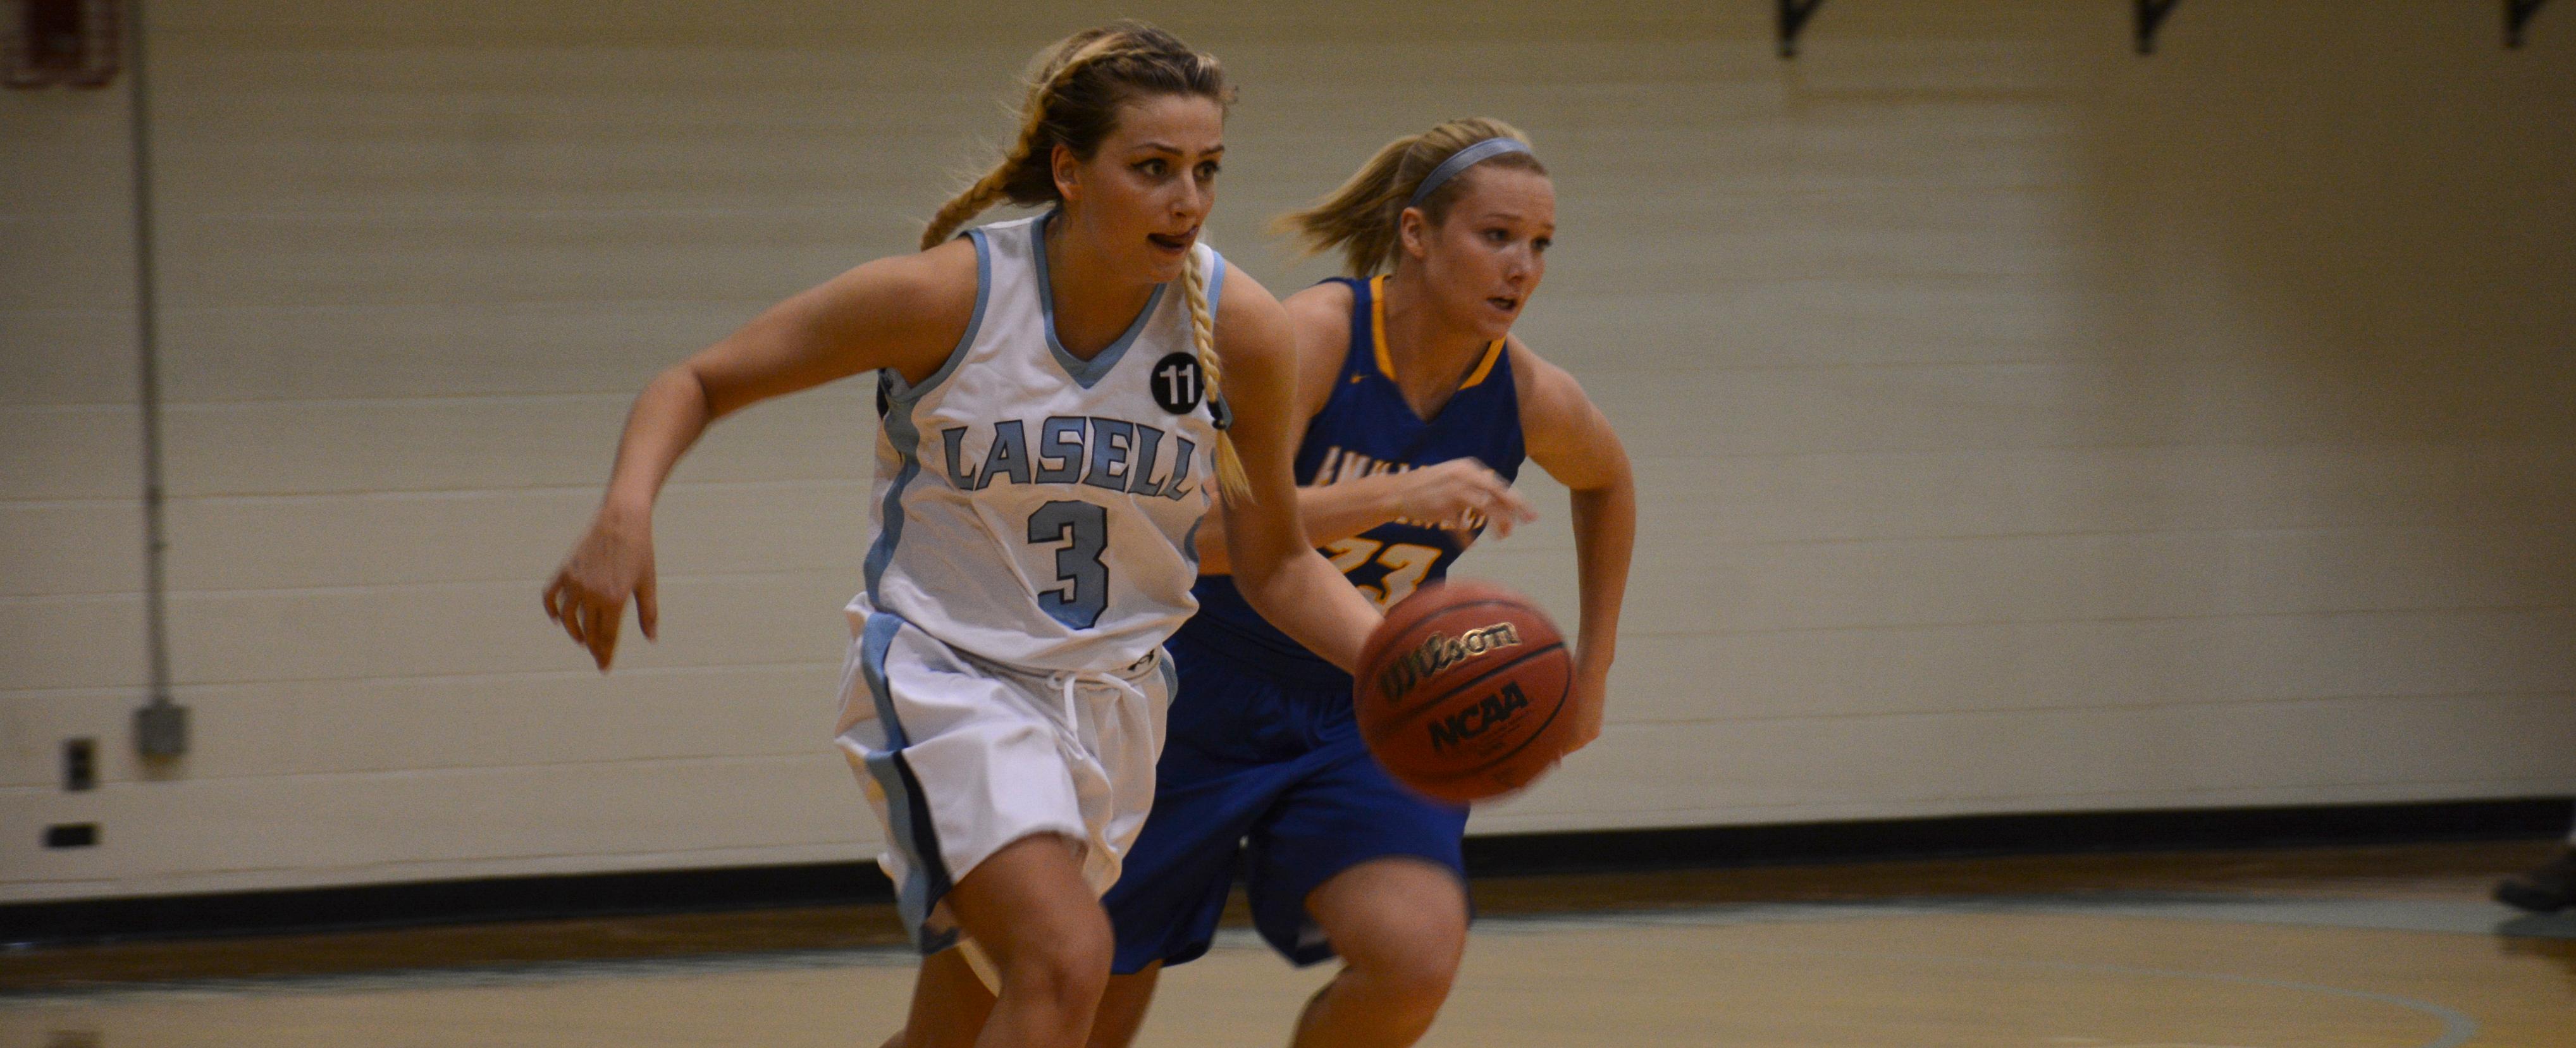 Strong Second Half Secures Women's Hoops' 54-46 Win over Anna Maria